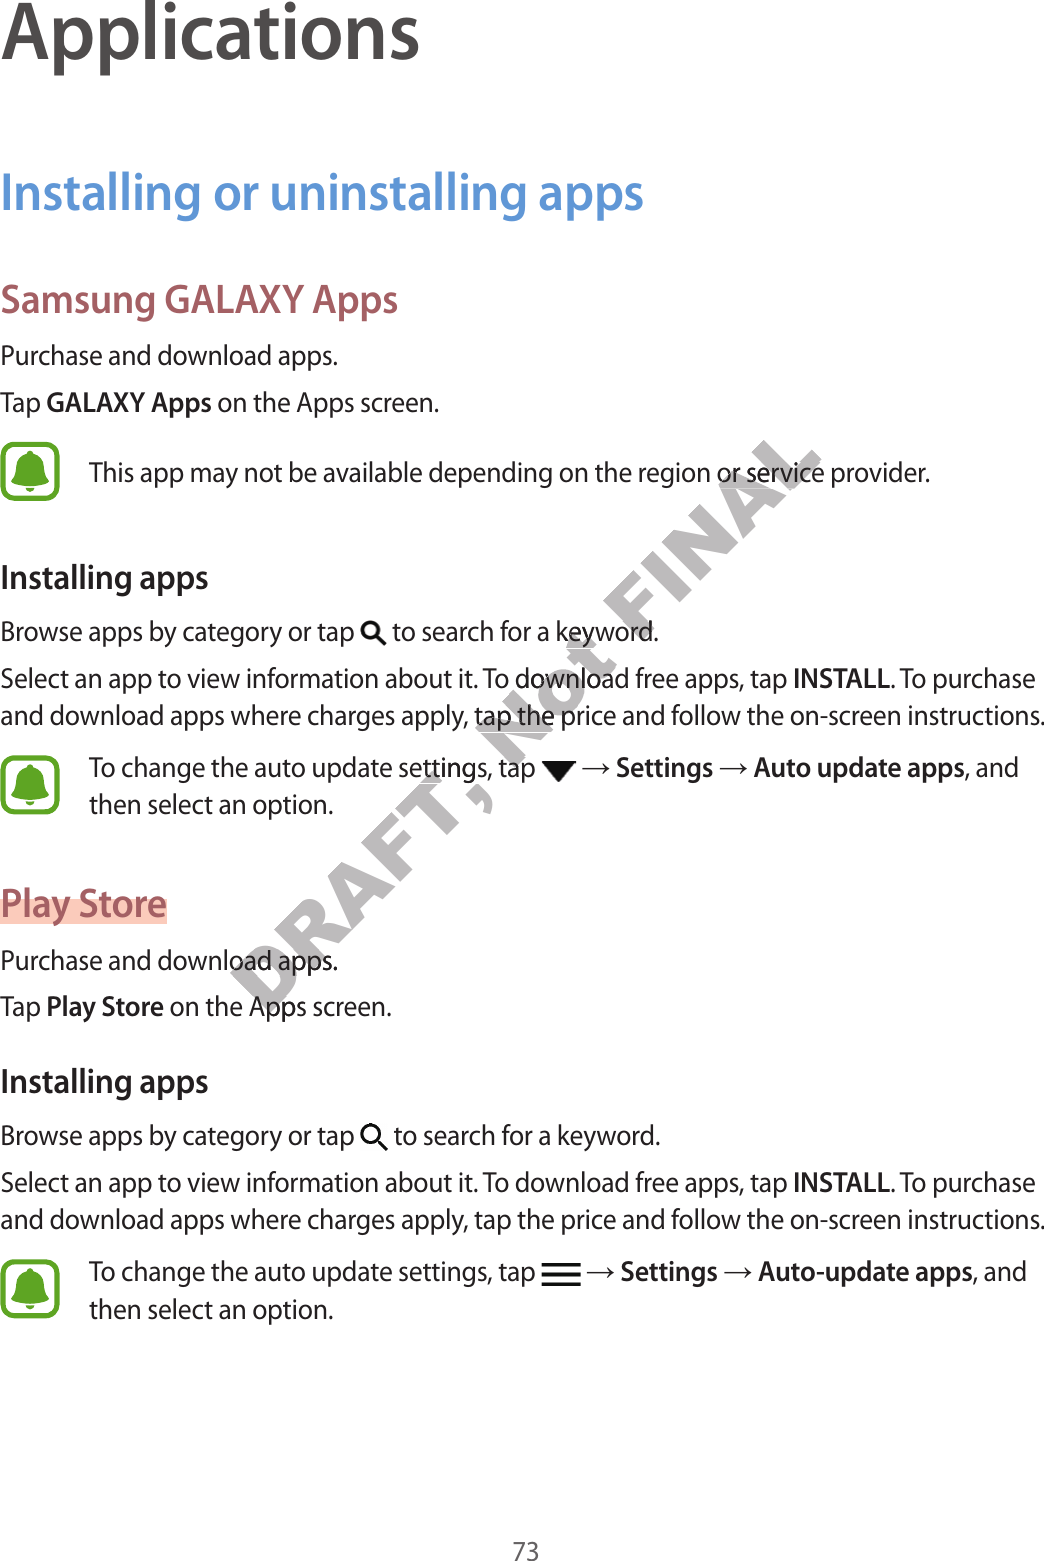 73ApplicationsInstalling or uninstalling appsSamsung GALAXY AppsPur chase and do wnload apps .Tap GALAXY Apps on the Apps screen.This app may not be a vailable depending on the r eg ion or service provider.Installing appsBrow se apps b y cat egory or tap   to search for a keywor d .Select an app to view inf ormation about it. To download free apps, tap INSTALL. To purchase and download apps where char ges apply, tap the price and f ollo w the on-scr een instructions.To change the auto update settings , tap    Settings  Aut o updat e apps, and then select an option.Pla y St orePur chase and do wnload apps .Tap Play St or e on the Apps screen.Installing appsBrow se apps b y cat egory or tap   to search for a keywor d .Select an app to view inf ormation about it. To download free apps, tap INSTALL. To purchase and download apps where char ges apply, tap the price and f ollo w the on-scr een instructions.To change the auto update settings , tap    Settings  Aut o-update apps, and then select an option.DRAFT, To change the auto update settings , tap DRAFT, To change the auto update settings , tap Pur chase and do wnload apps .DRAFT, Pur chase and do wnload apps .DRAFT,  on the Apps screen.DRAFT,  on the Apps screen.Not  to search for a keywor d .Not  to search for a keywor d .Select an app to view inf ormation about it. To download free apps, tap Not Select an app to view inf ormation about it. To download free apps, tap and download apps where char ges apply, tap the price and f ollo w the on-scr een instructions.Not and download apps where char ges apply, tap the price and f ollo w the on-scr een instructions.To change the auto update settings , tap Not To change the auto update settings , tap FINALThis app may not be a vailable depending on the r eg ion or service provider.FINALThis app may not be a vailable depending on the r eg ion or service provider. to search for a keywor d .FINAL to search for a keywor d .